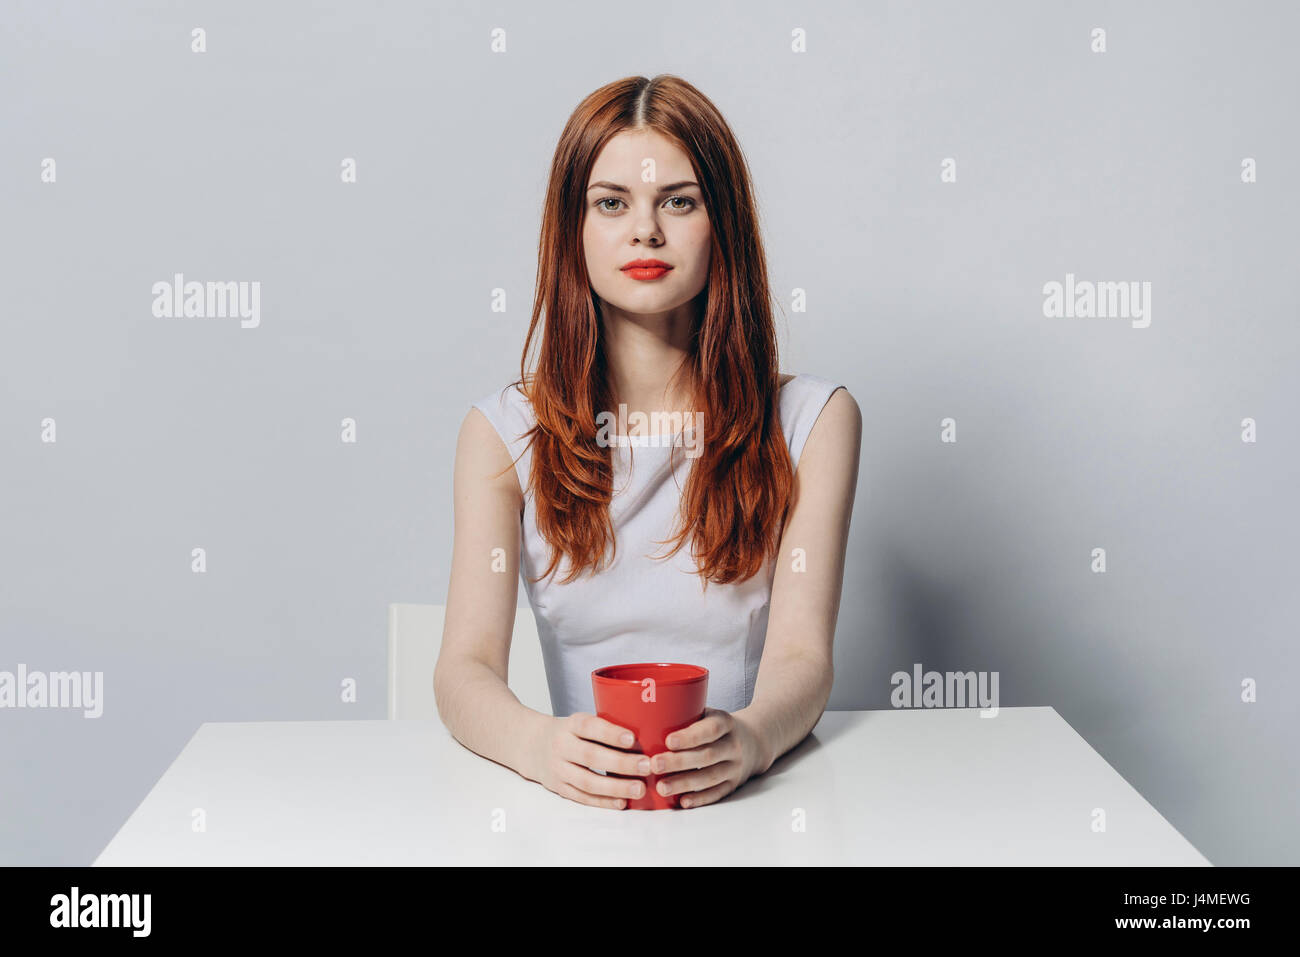 Caucasian woman sitting at table holding red cup Stock Photo